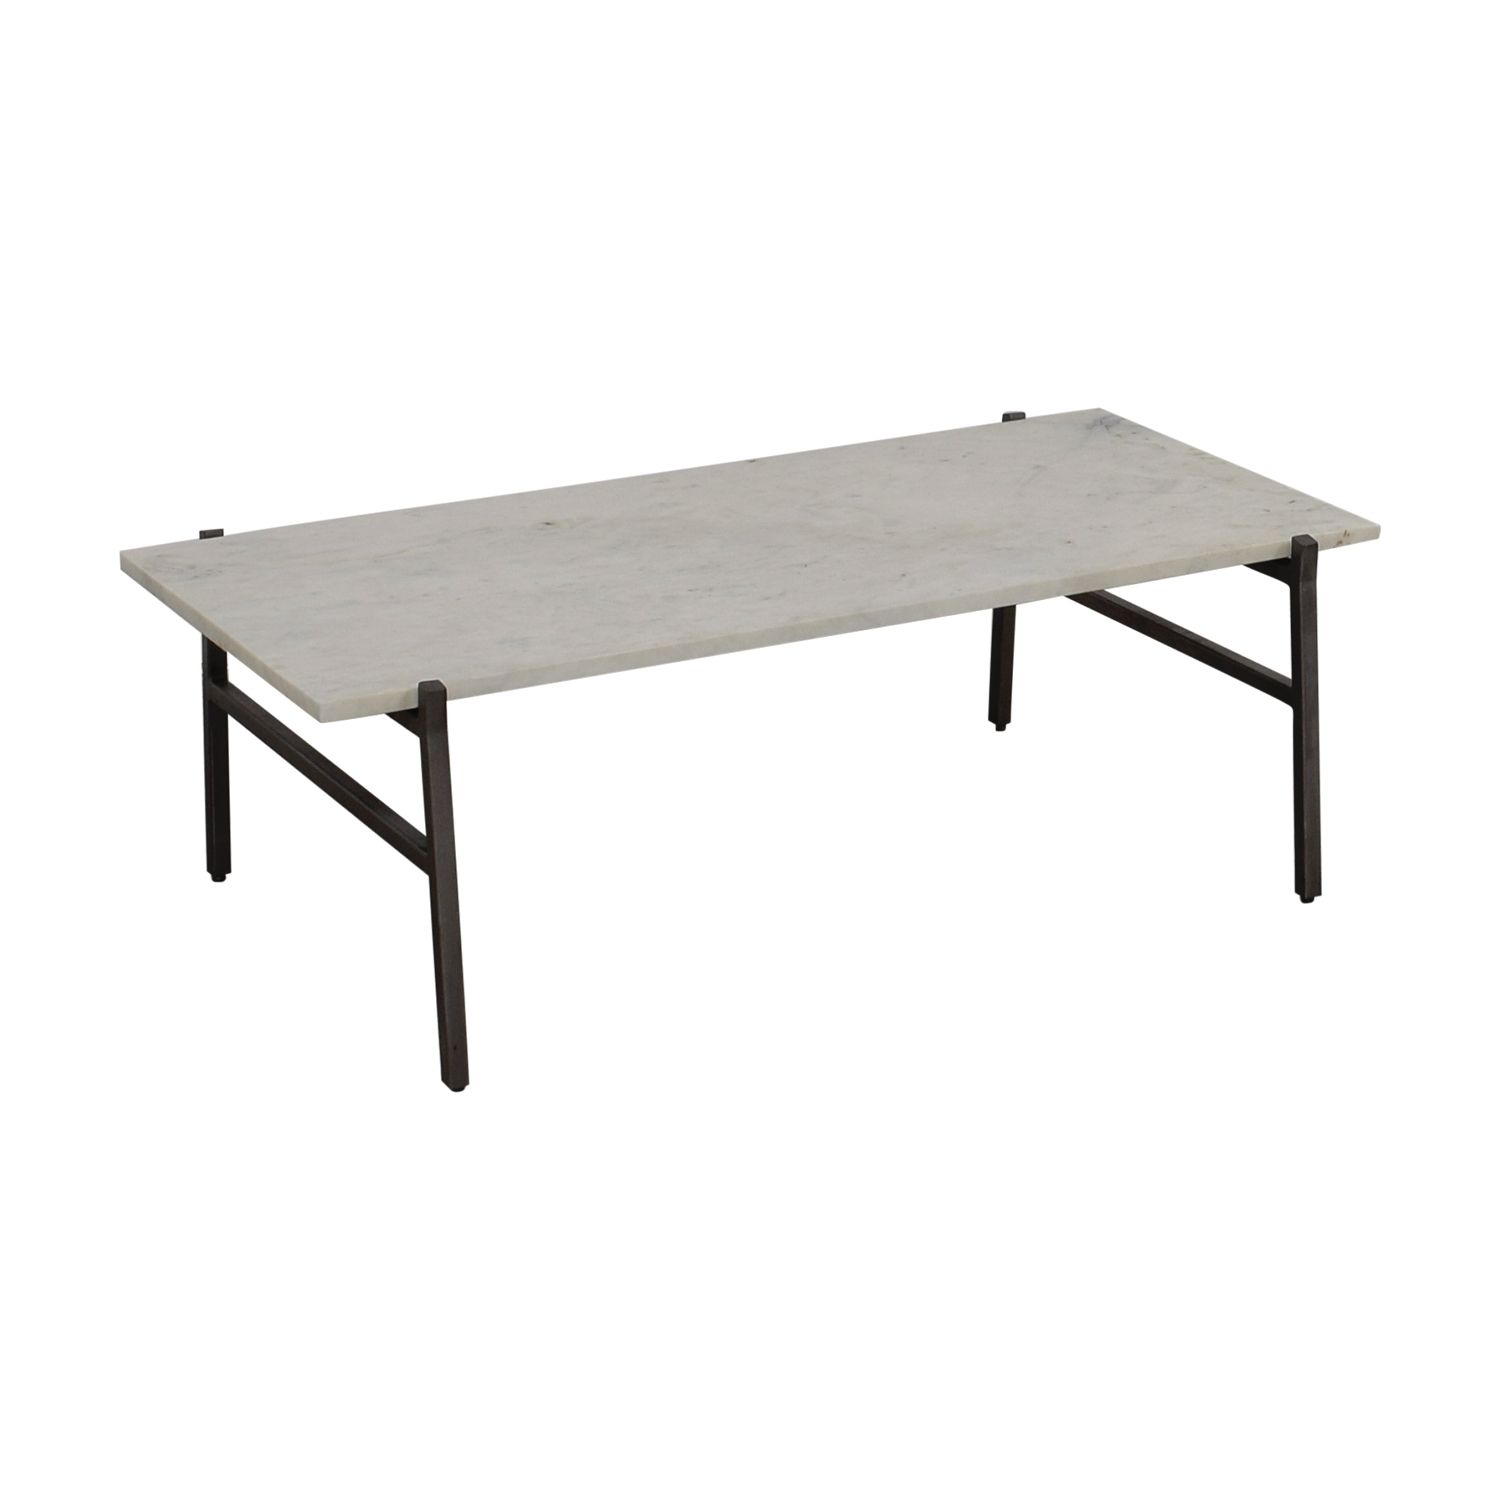 [%well Known Slab Small Marble Coffee Tables With Antiqued Silver Base Throughout 24% Off – Cb2 Cb2 Slab Small Marble Coffee Table With Antiqued|24% Off – Cb2 Cb2 Slab Small Marble Coffee Table With Antiqued In Most Popular Slab Small Marble Coffee Tables With Antiqued Silver Base%] (View 4 of 20)